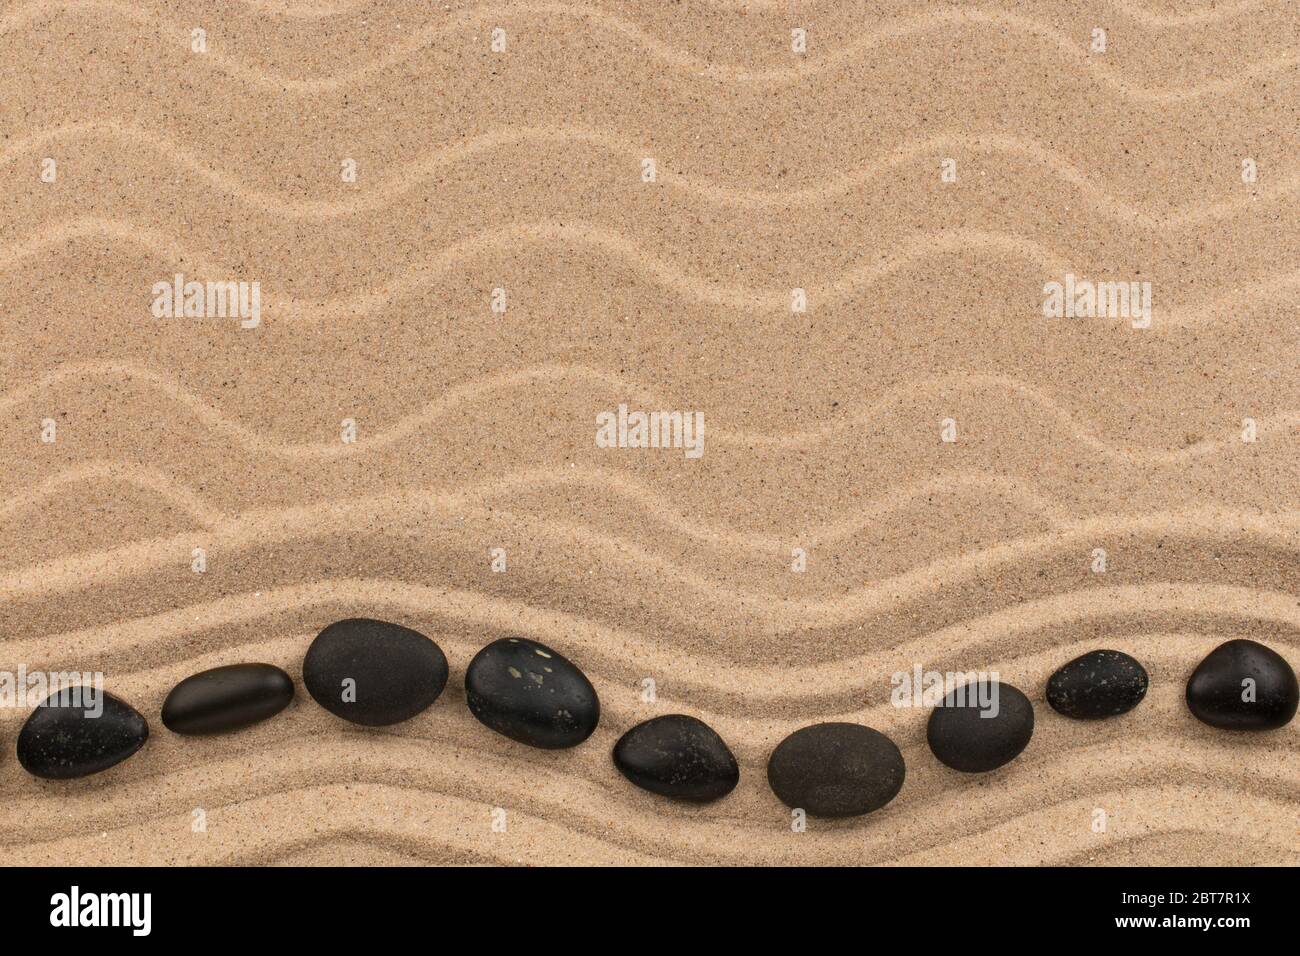 Wavy line made of black stones lying on the sand of a beach. Top view. Copy space Stock Photo